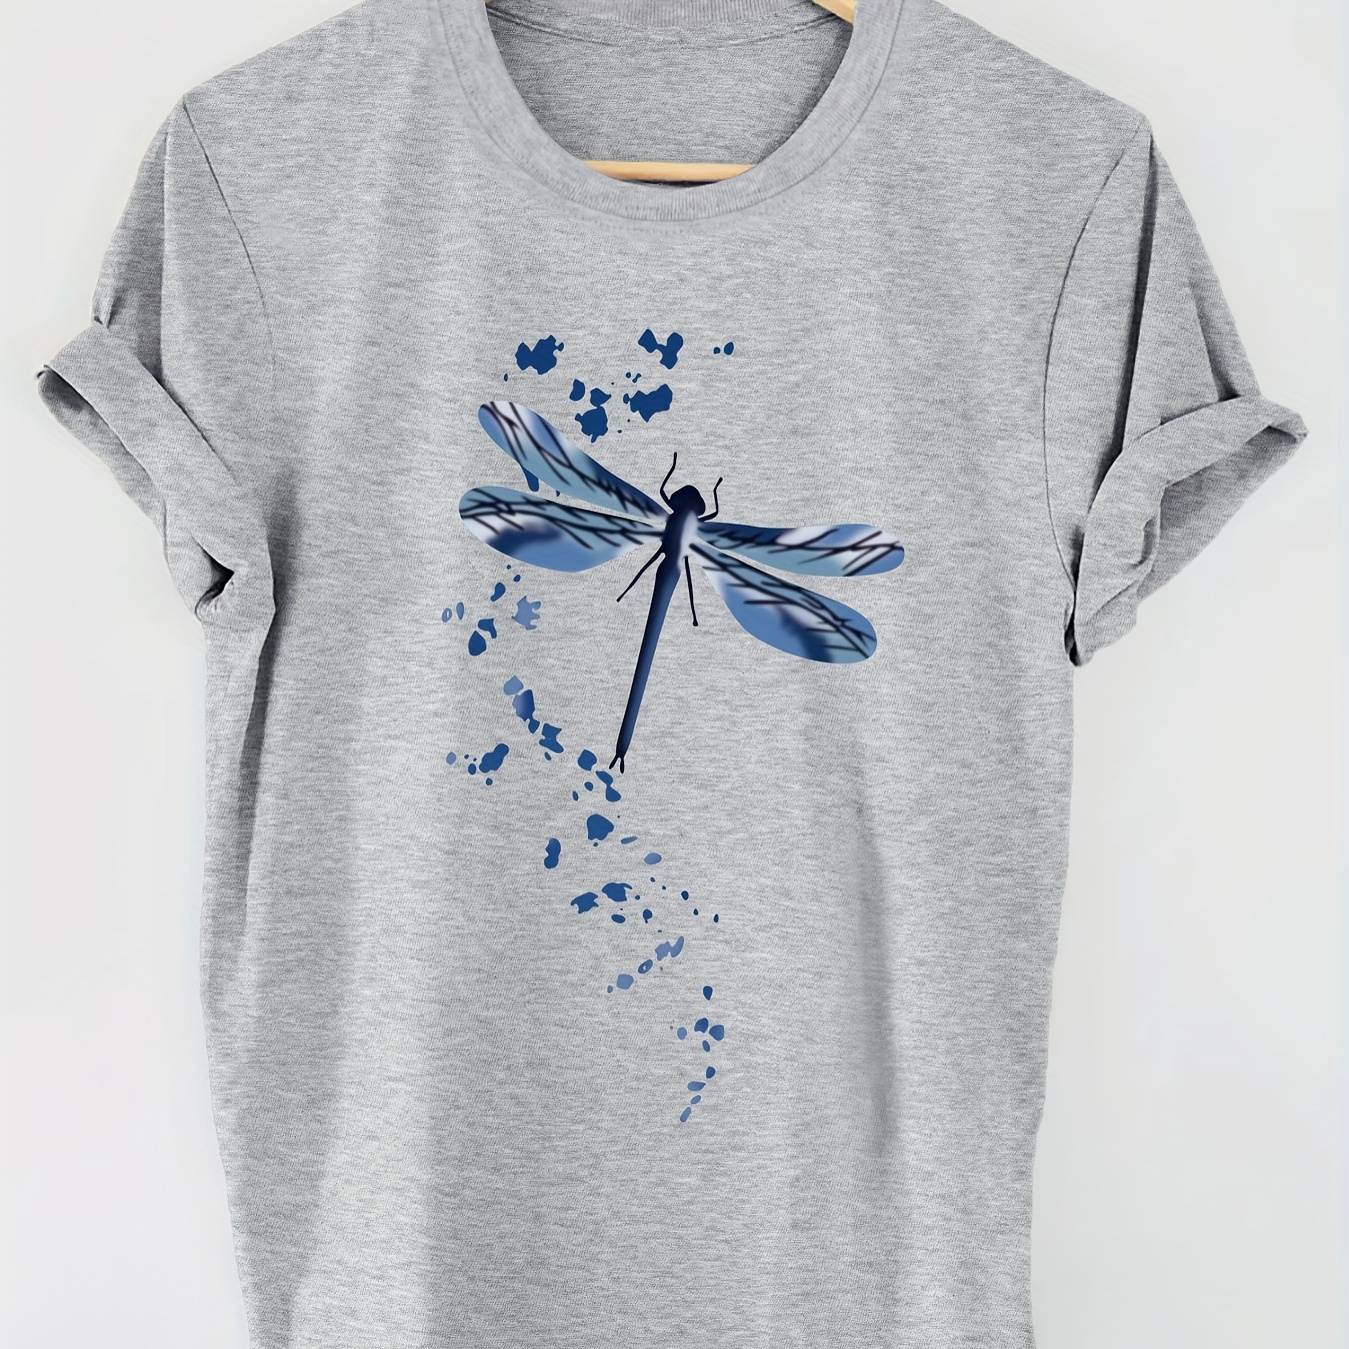 

Dragonfly Graphic Print T-shirt, Short Sleeve Crew Neck Casual Top For Summer & Spring, Women's Clothing